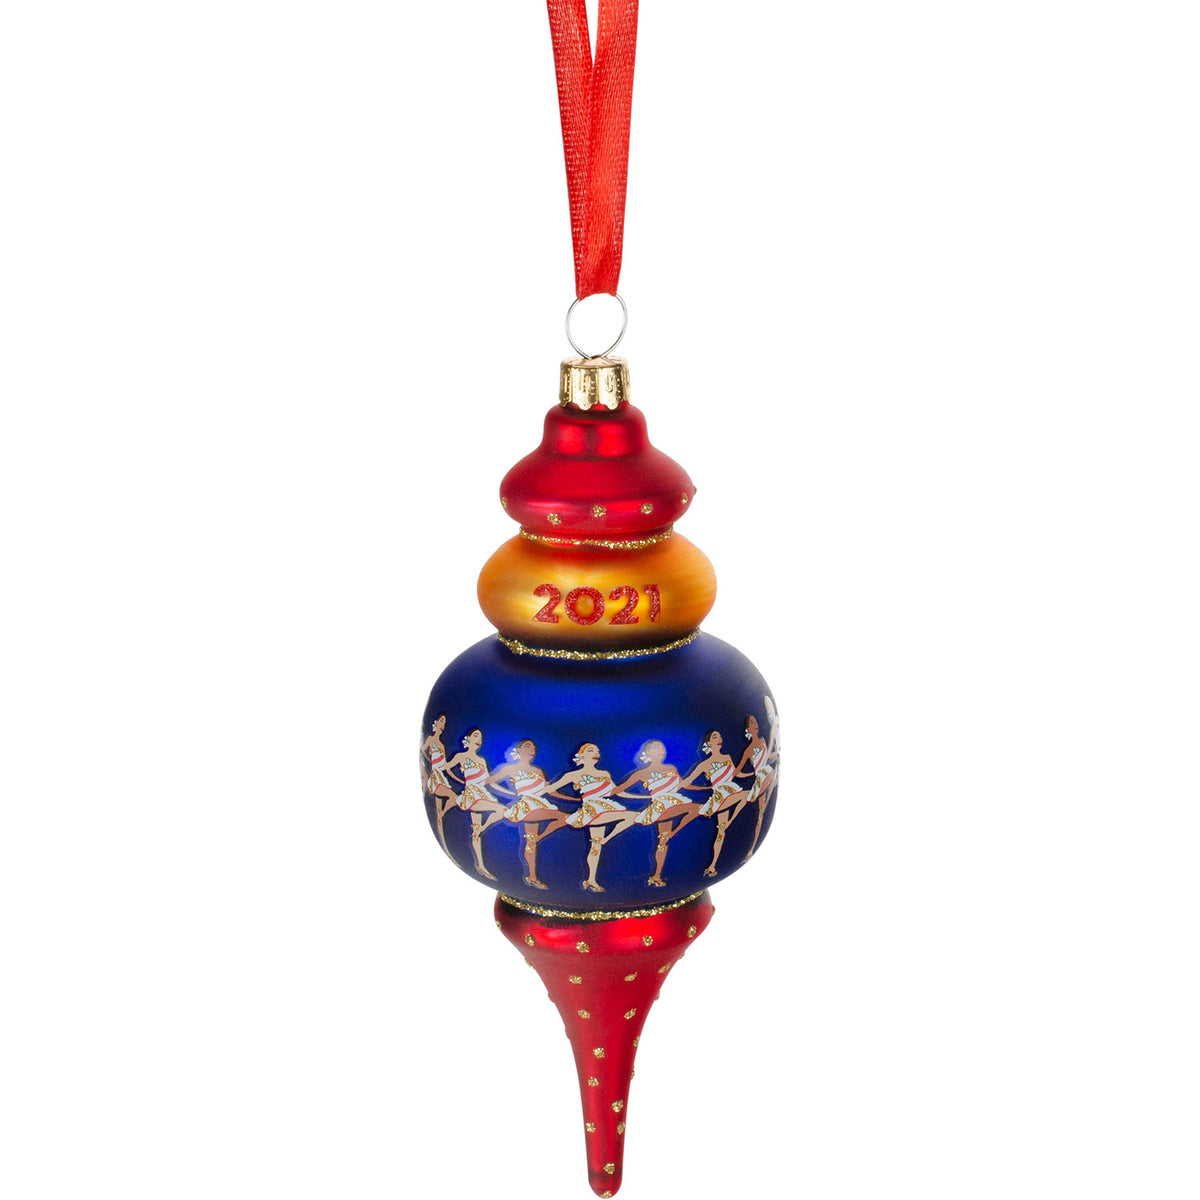 2021 Dated Ornament In Blue, Red &amp; Gold - Front View